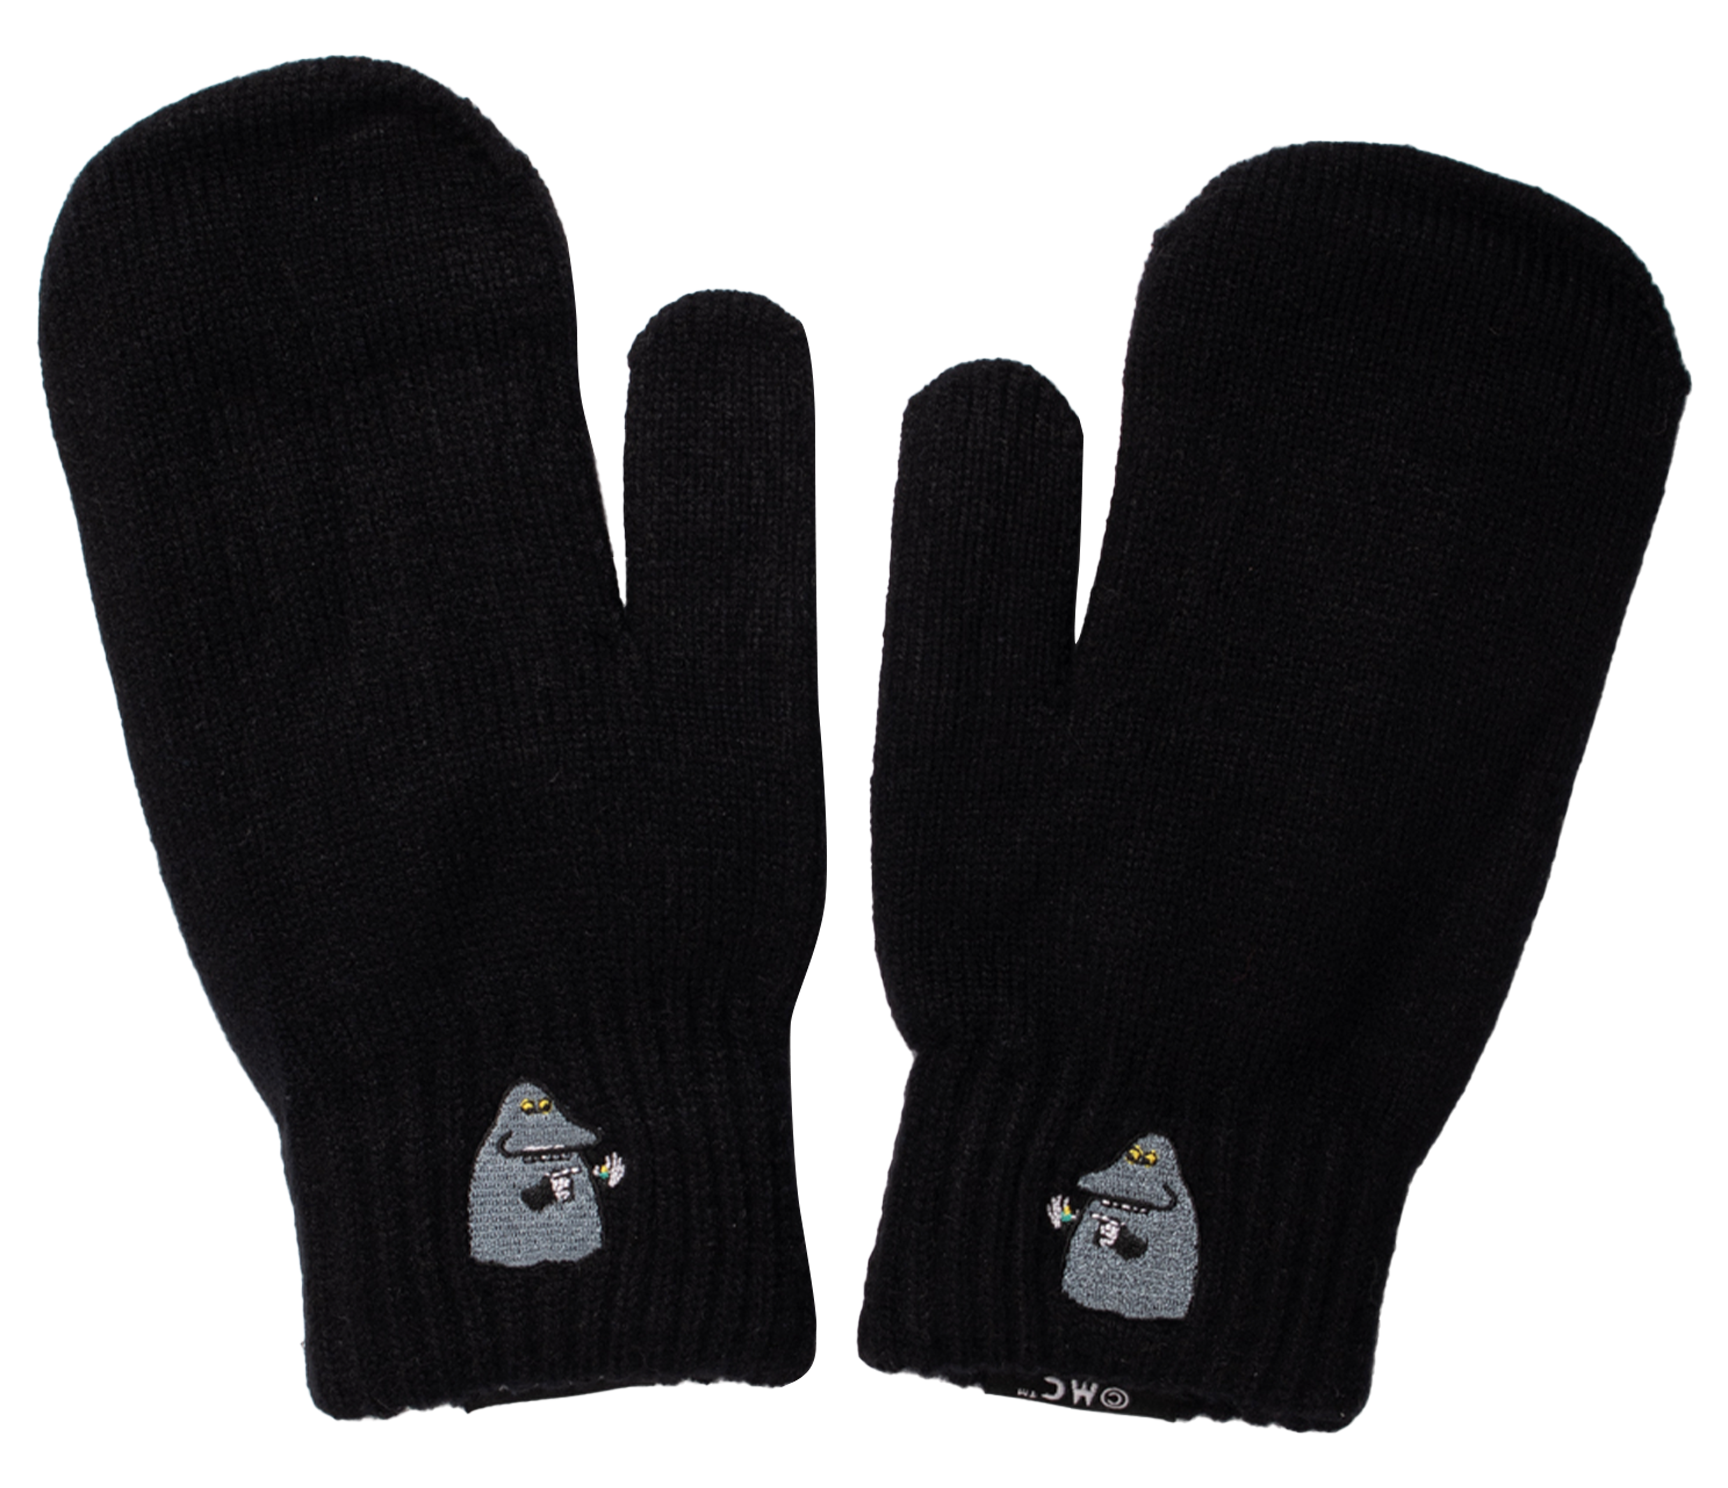 The Groke Mittens and Beanie Kids Combo - Black